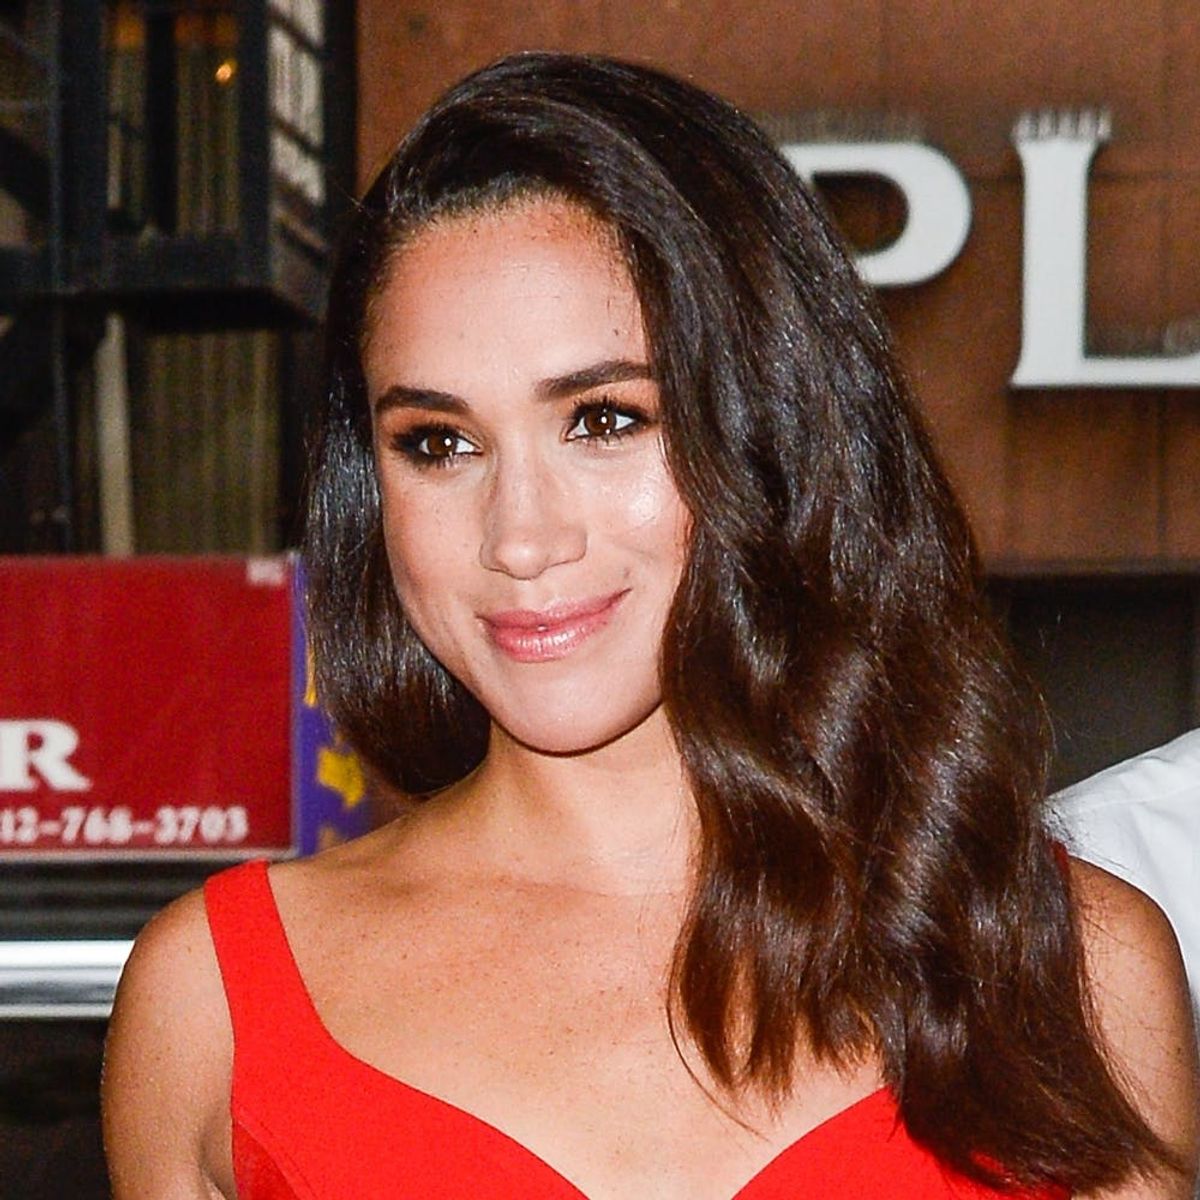 Meghan Markle Publicly Expressed Her Love for Prince Harry and We Almost Missed It